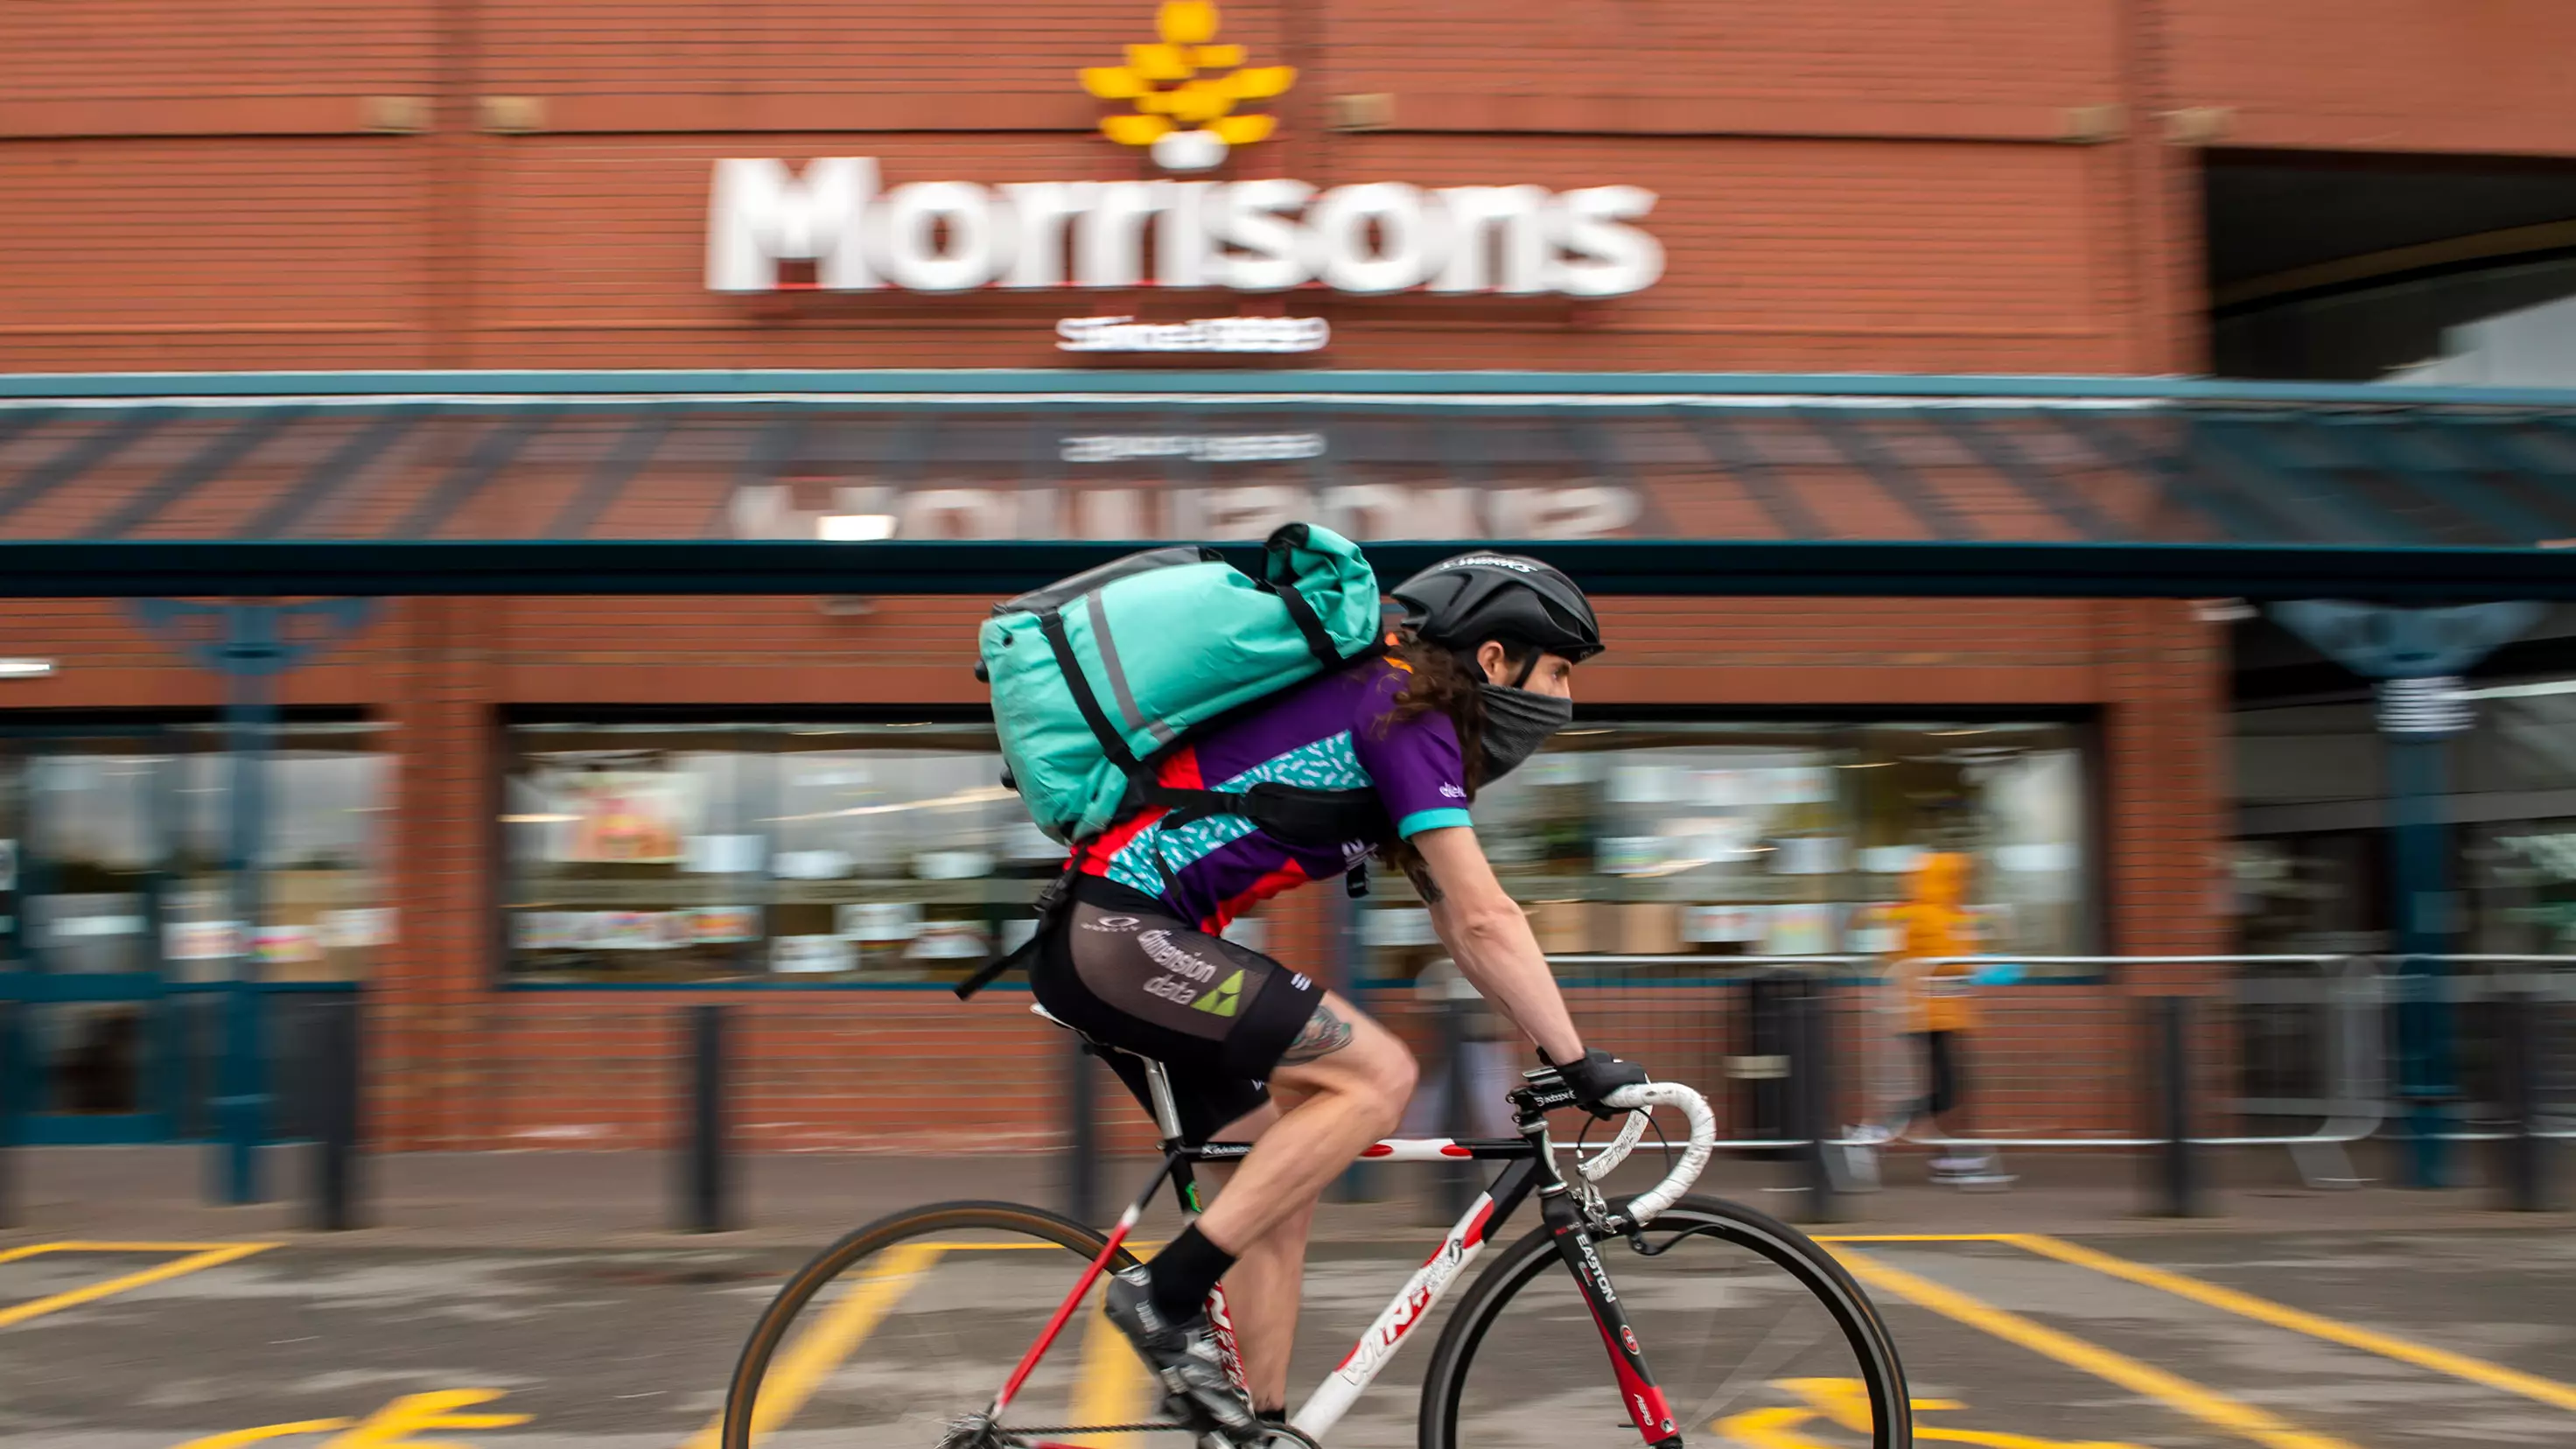 Morrisons And Deliveroo Launch 30-Minute Alcohol Delivery Service